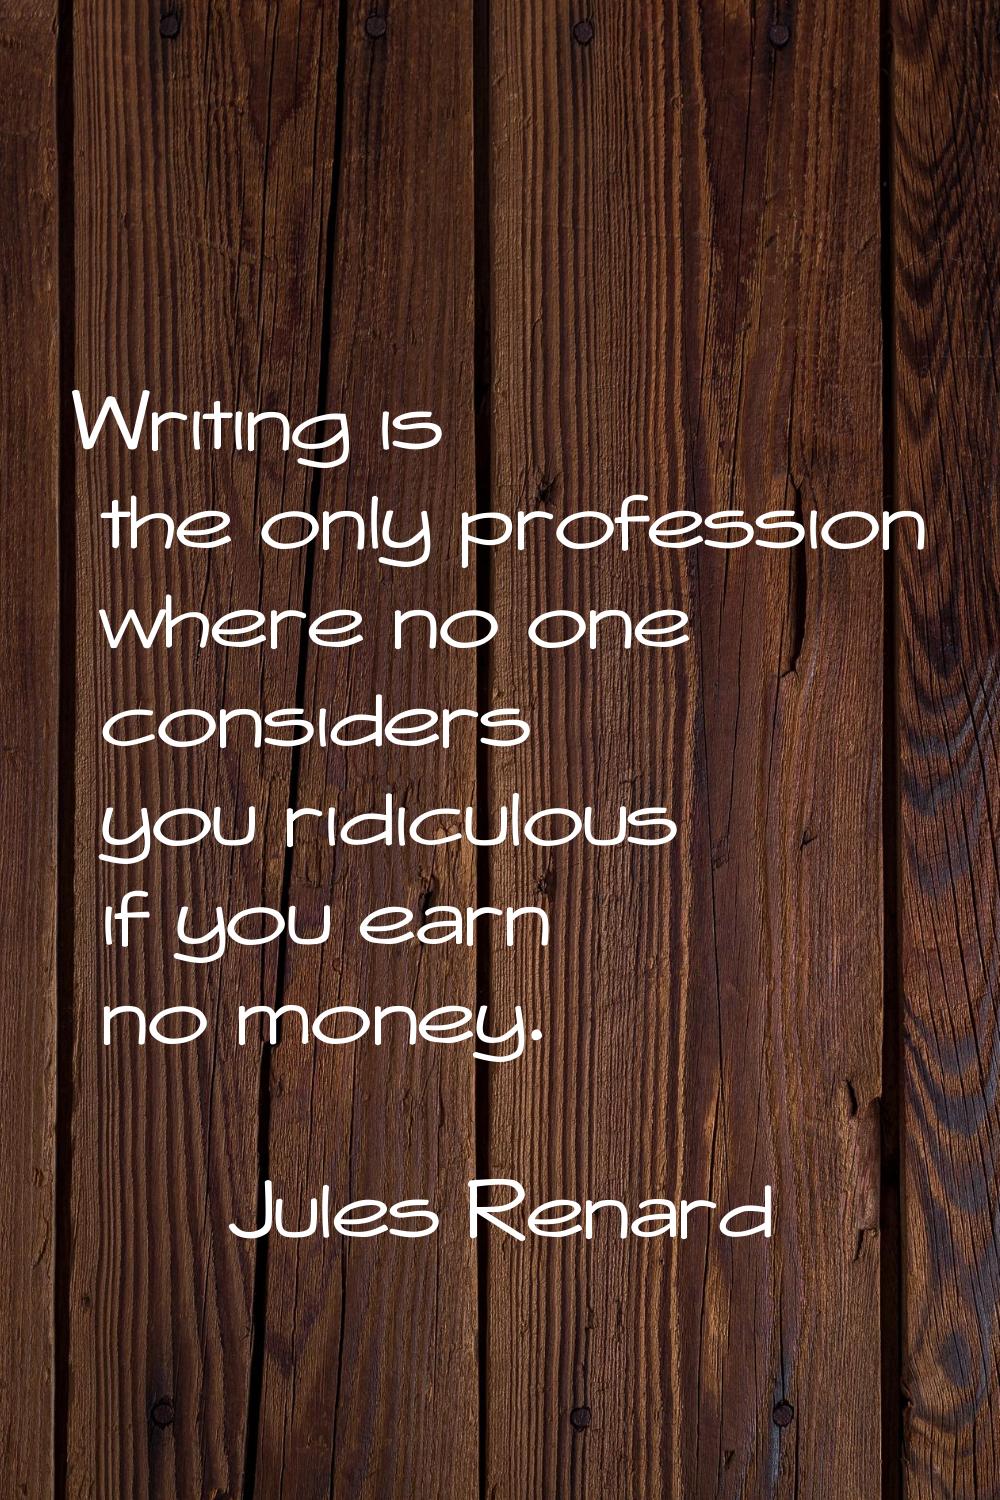 Writing is the only profession where no one considers you ridiculous if you earn no money.